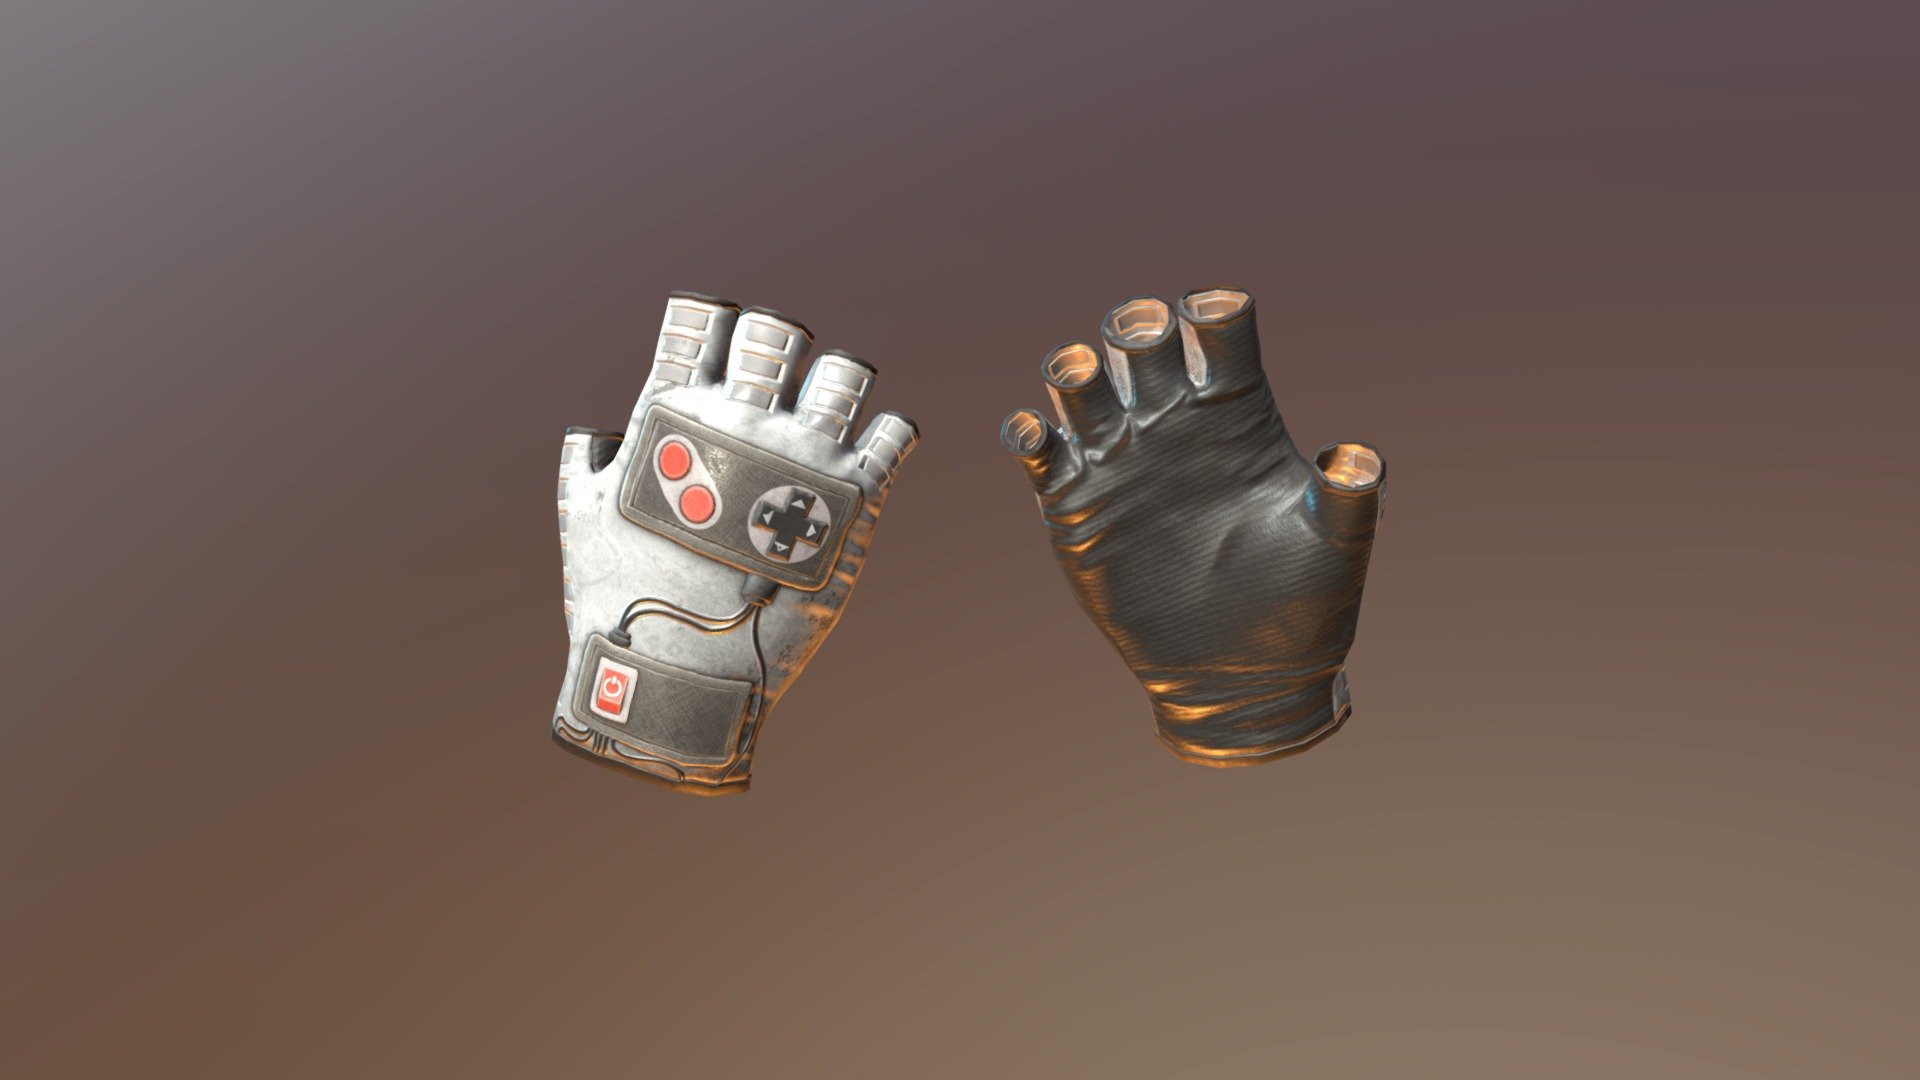 A skin for the Leather Gloves in Rust based off of old power glove controllers 3d model